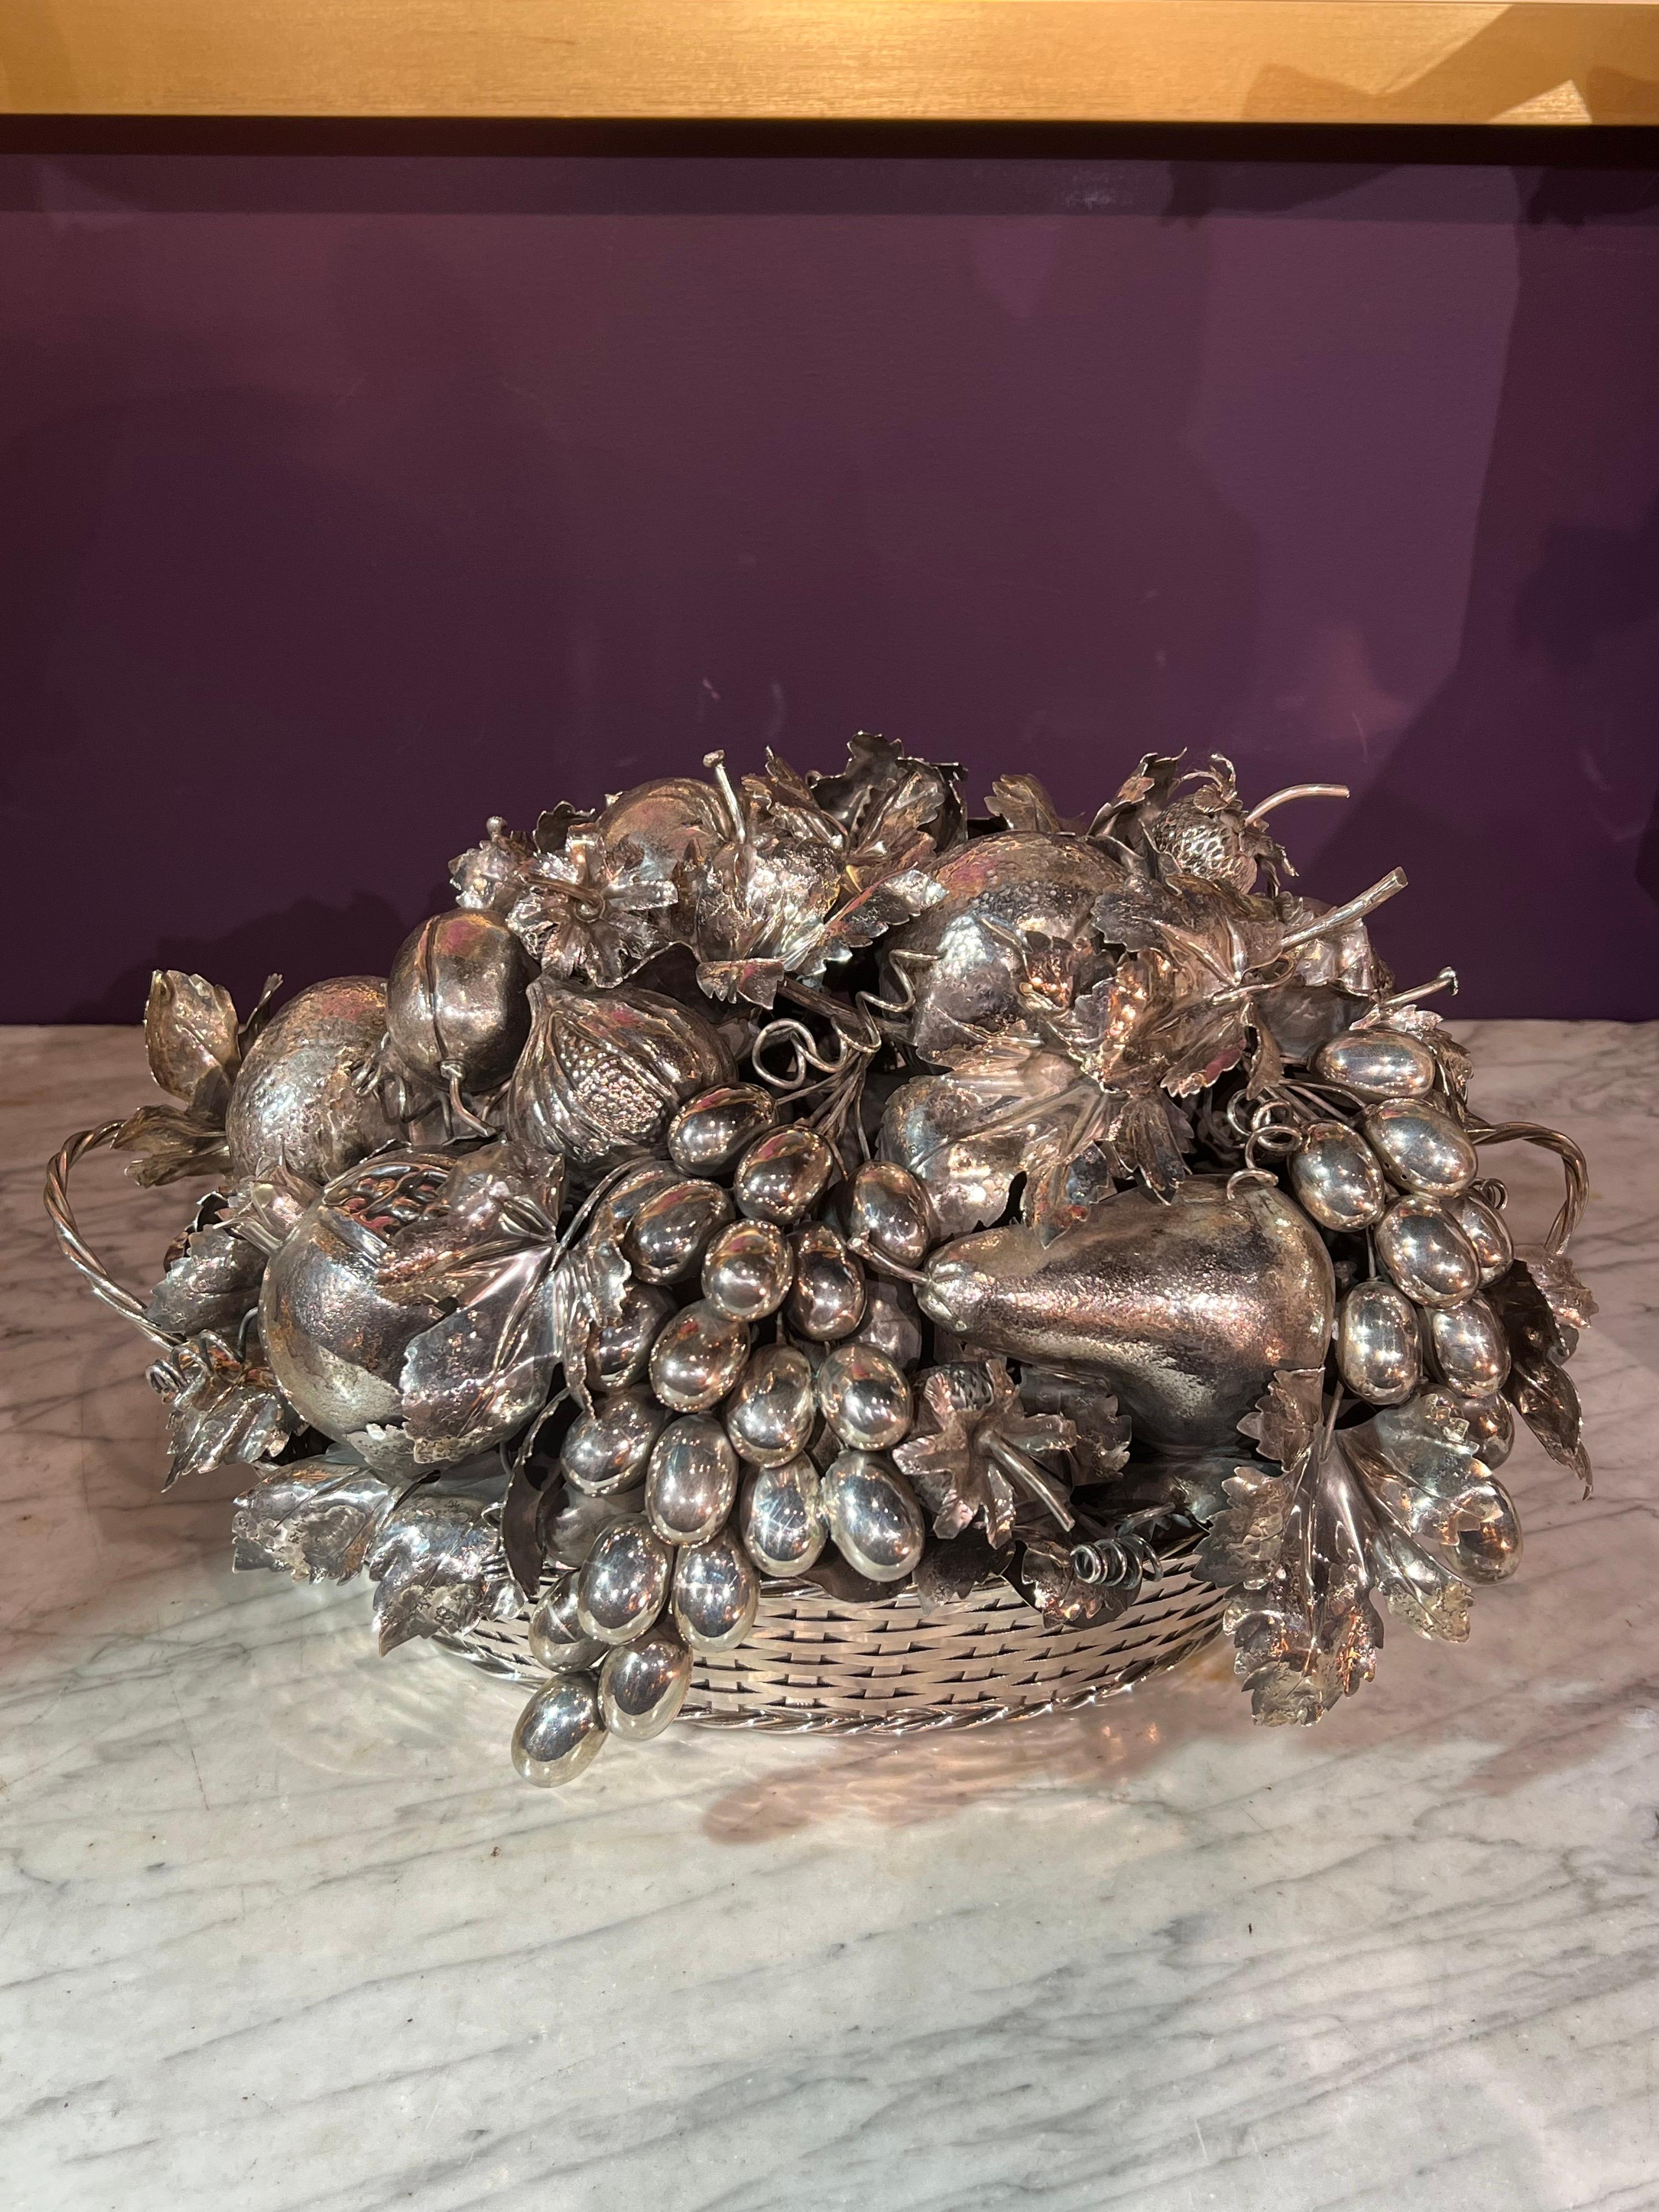 Mario Buccellati, An Italian Silver Fruit Basket Centerpiece and Bowl, Milan 20th century

The oval basket centerpiece is formed with woven bands, the lift-off cover is realistically a modeled as a group of fruits and leaves including grapes,